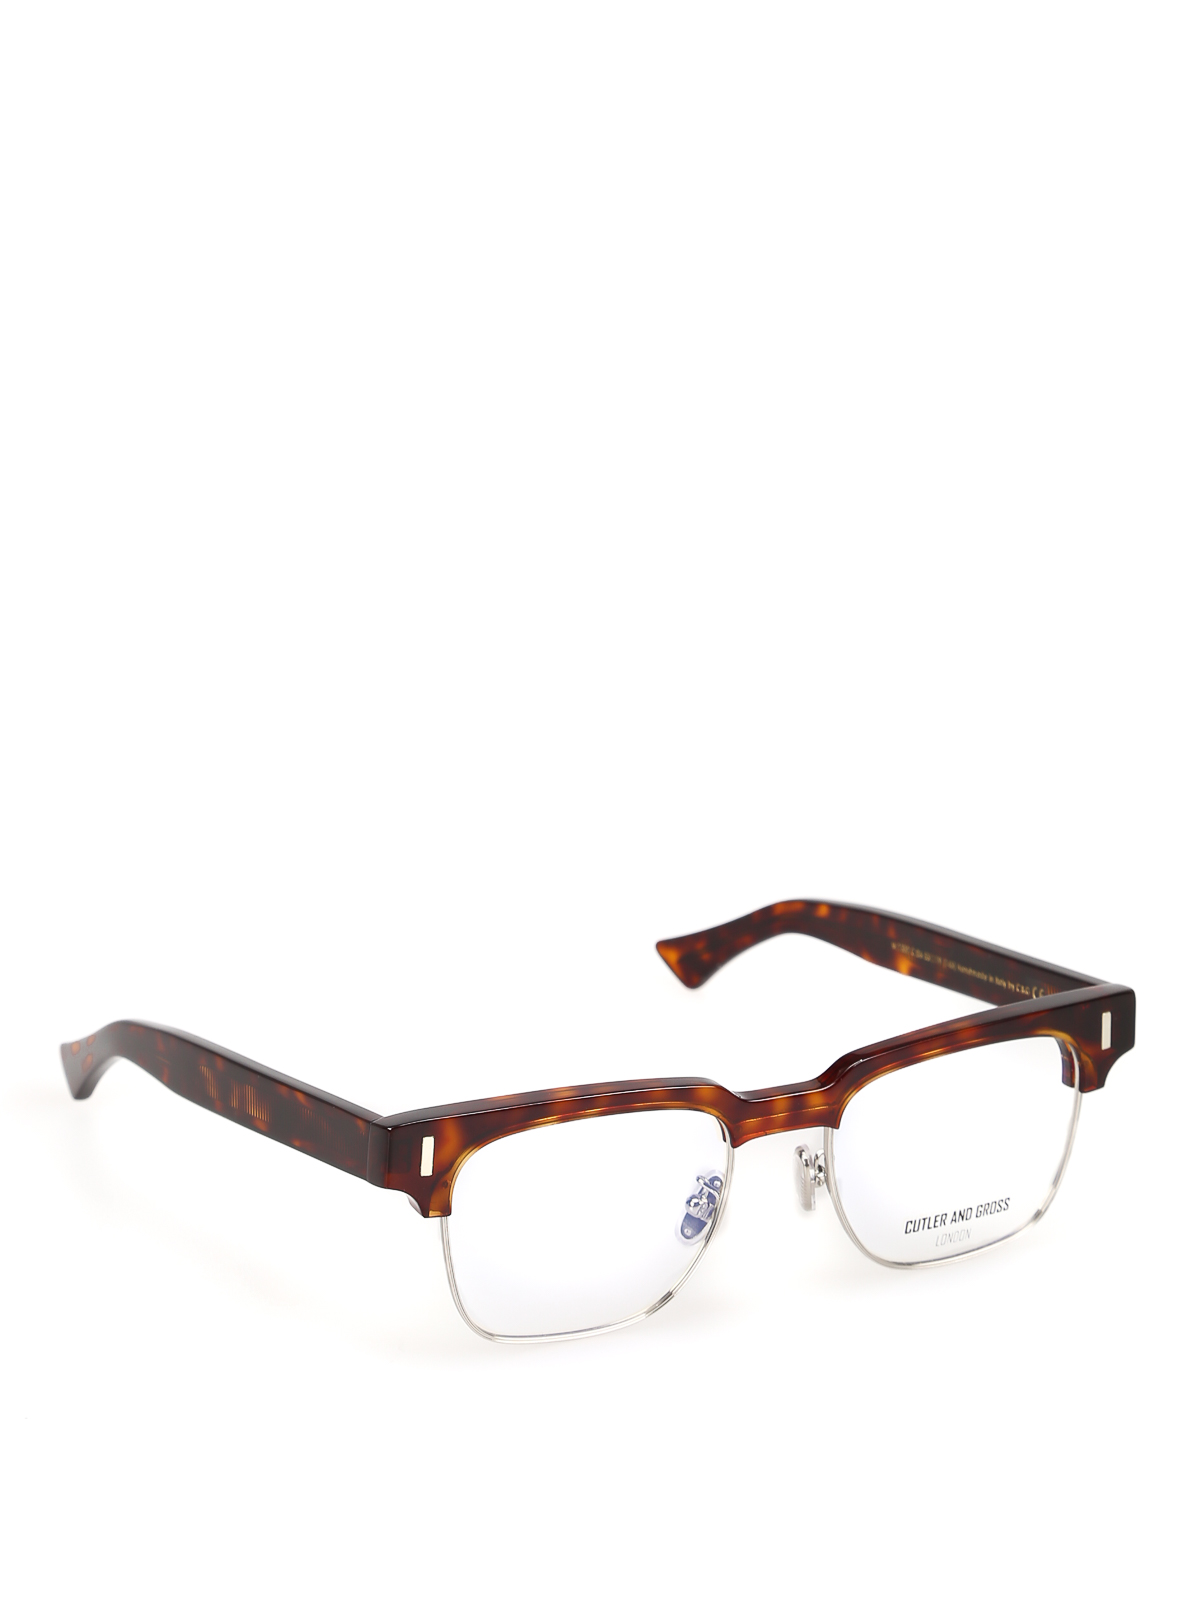 CUTLER AND GROSS METAL AND TORTOISE ACETATE EYEGLASSES